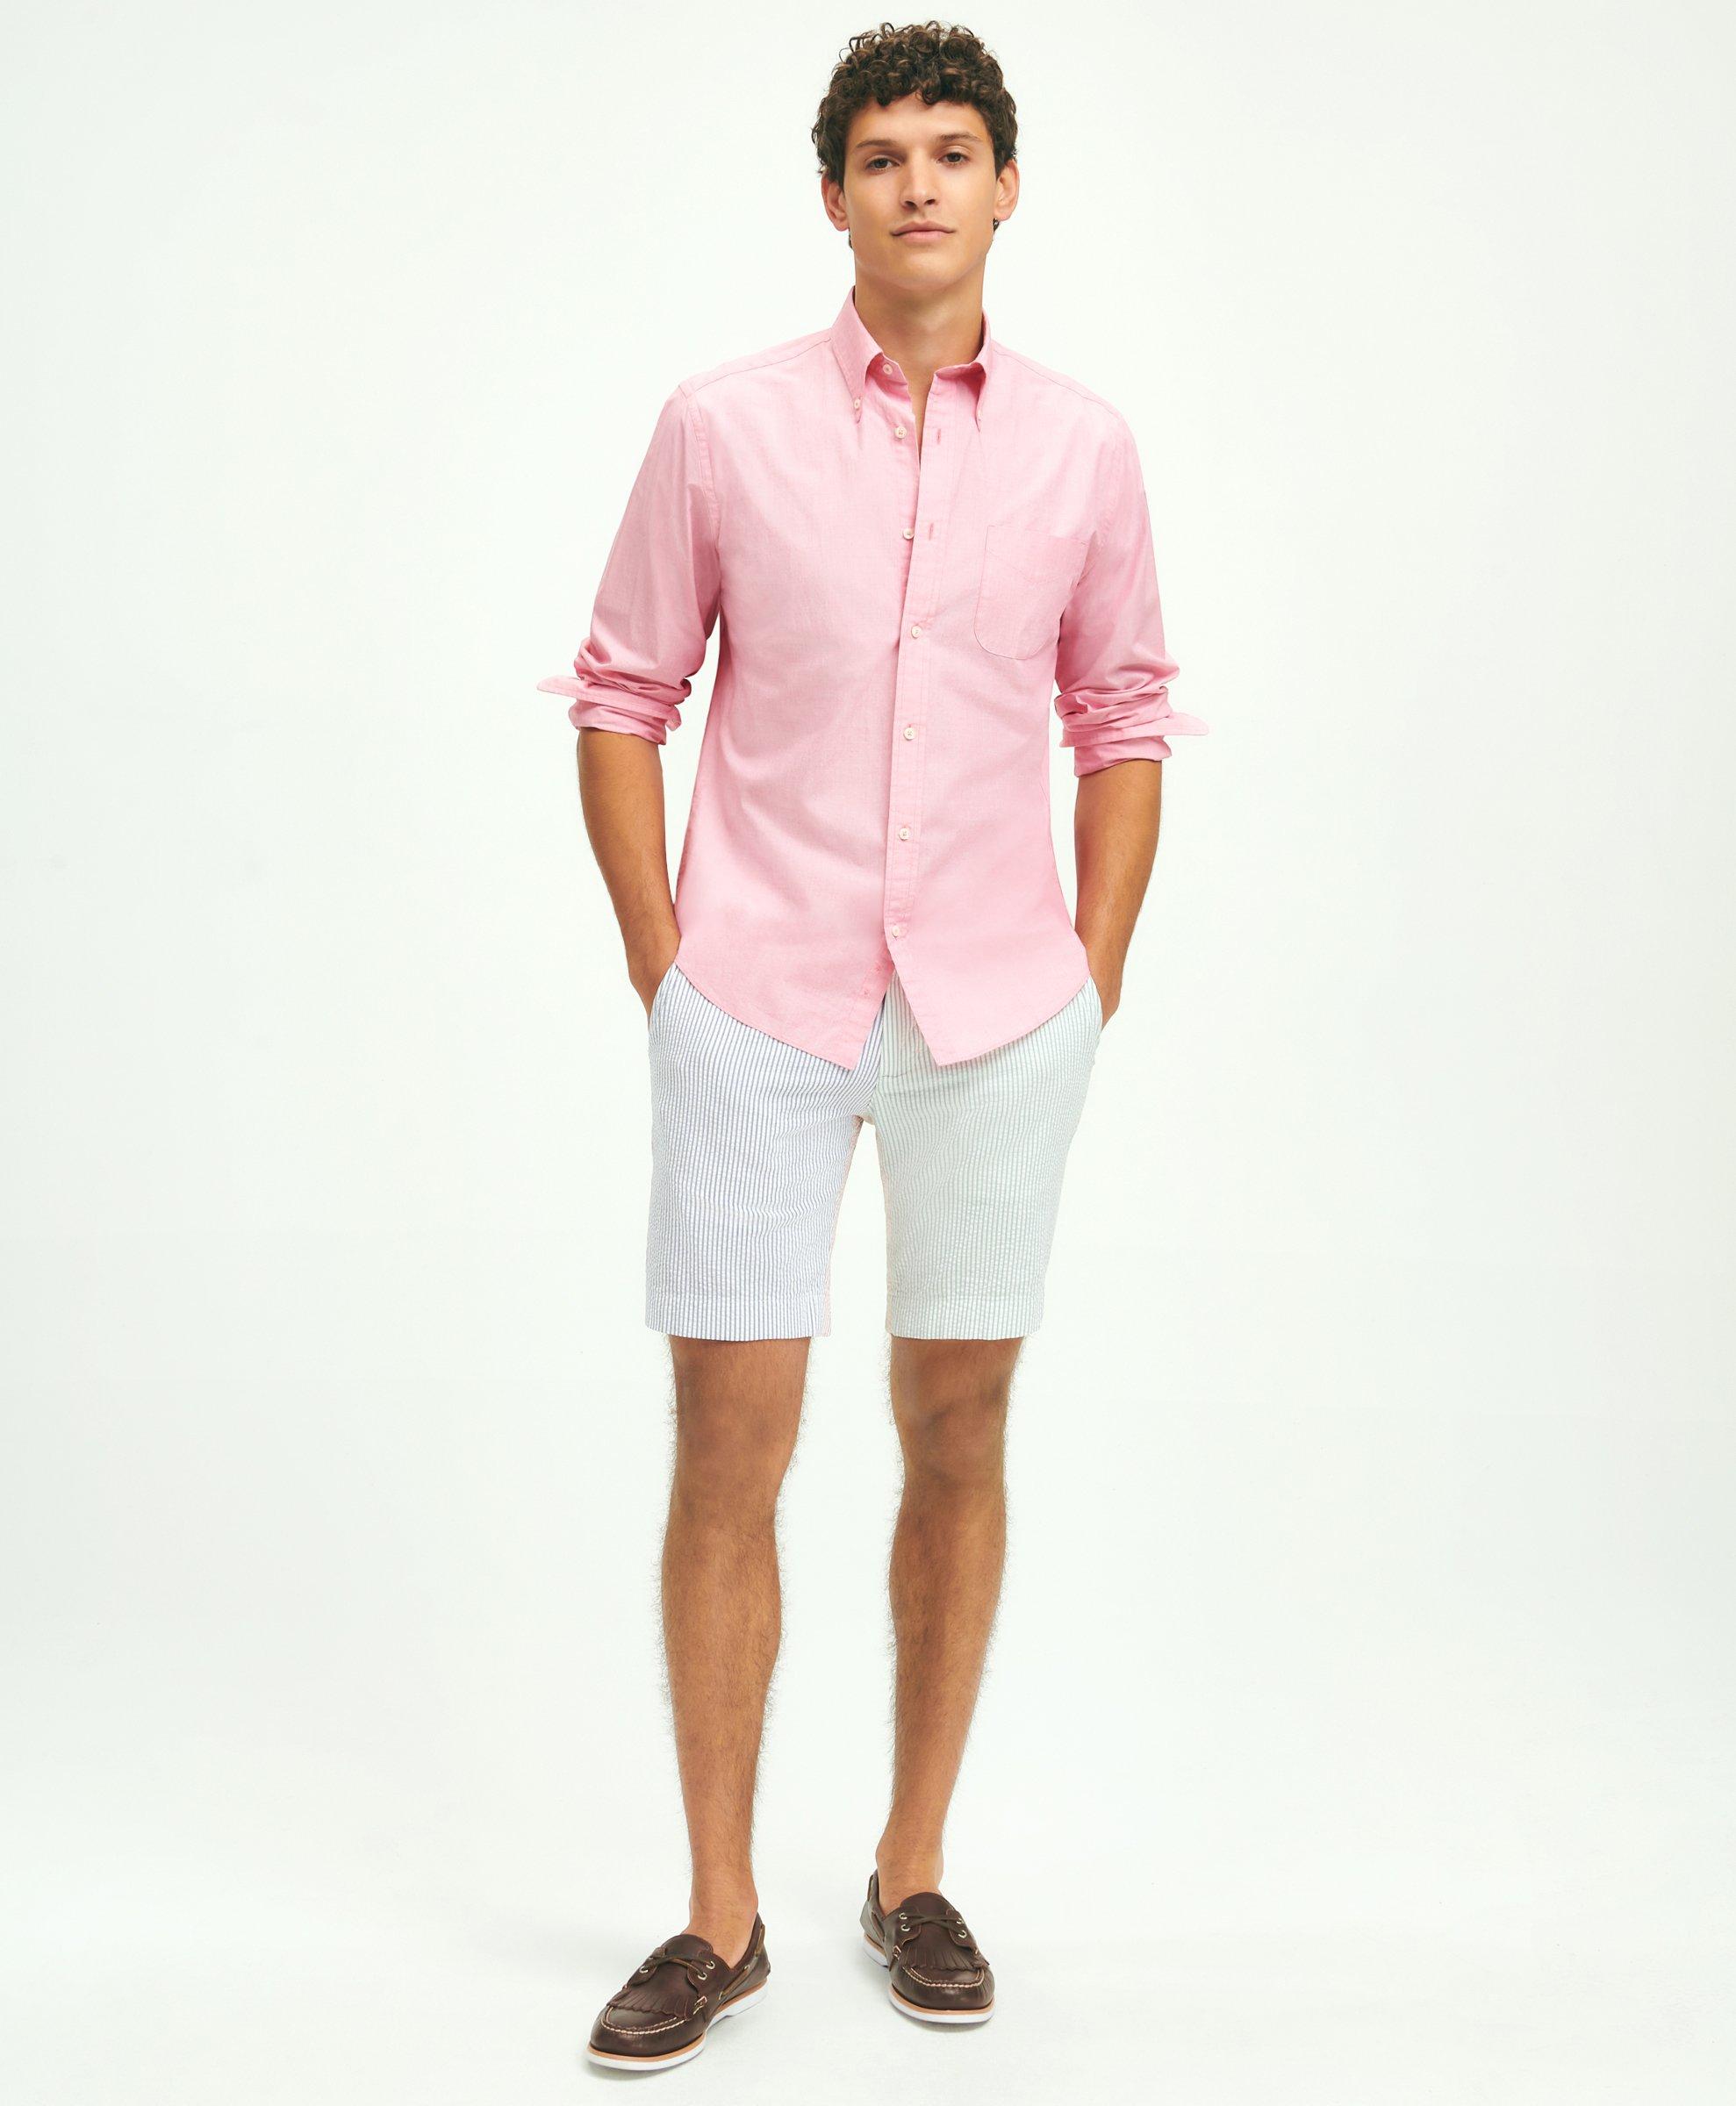 pink shorts outfit men